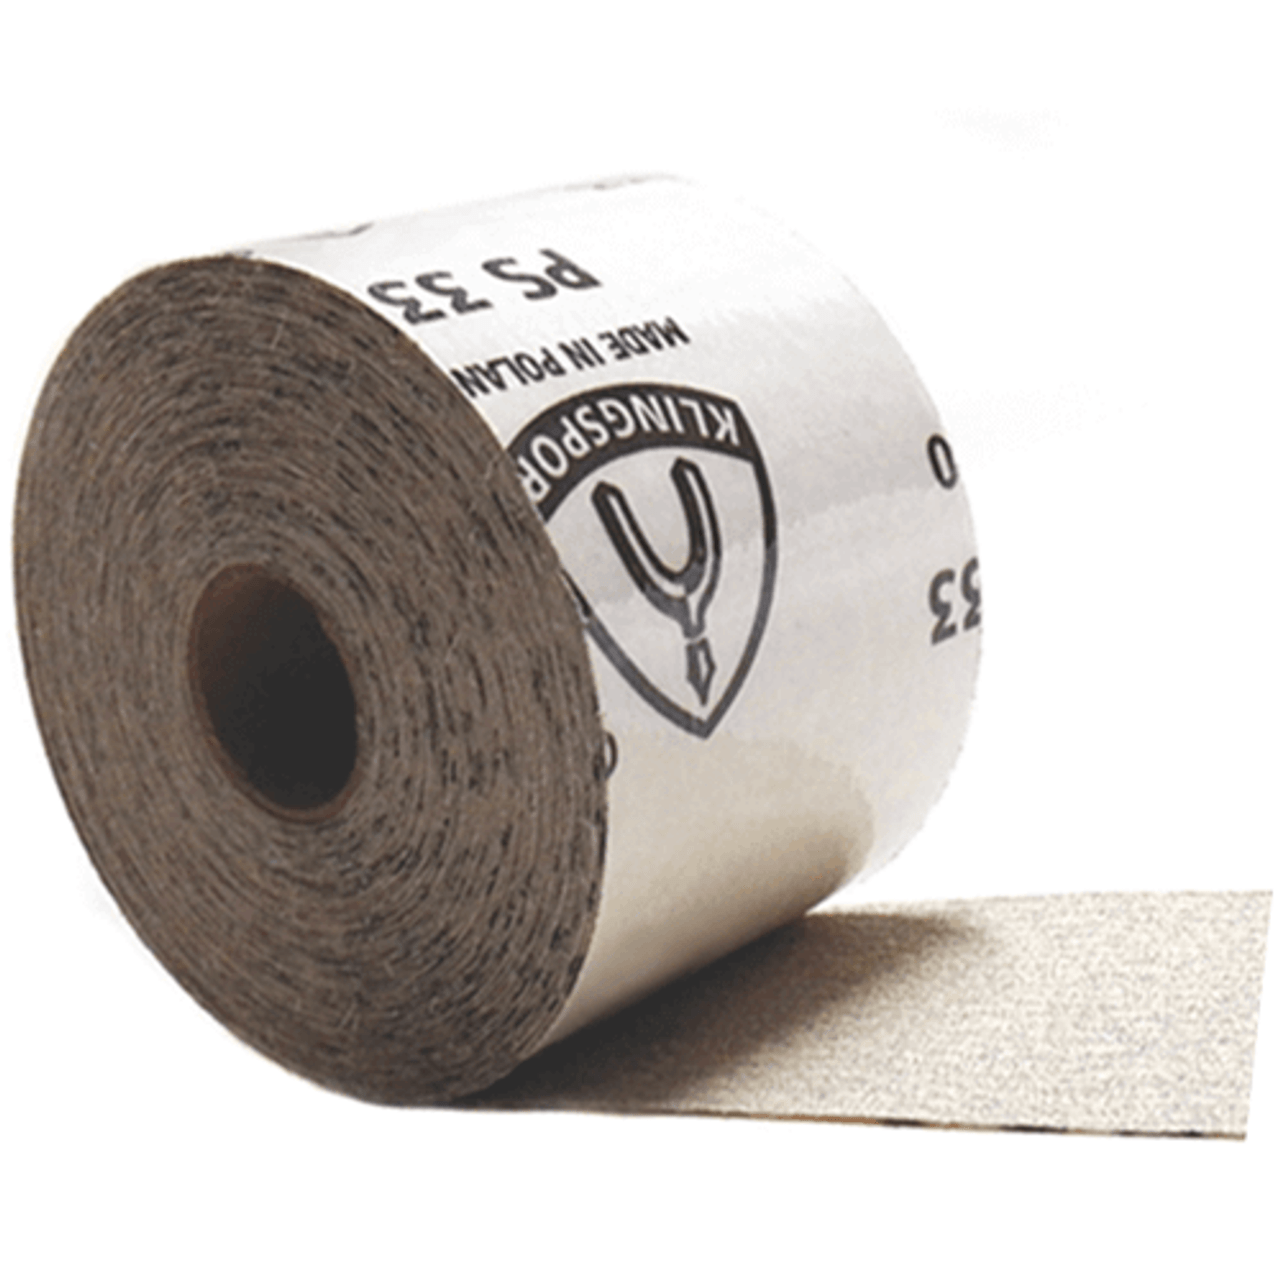 Klingspor Abrasives Stearate Aluminum Oxide, PS33, 2-1/2"x 10MT (33') Sticky Backed Roll, 120 Grit, For Porter Cable